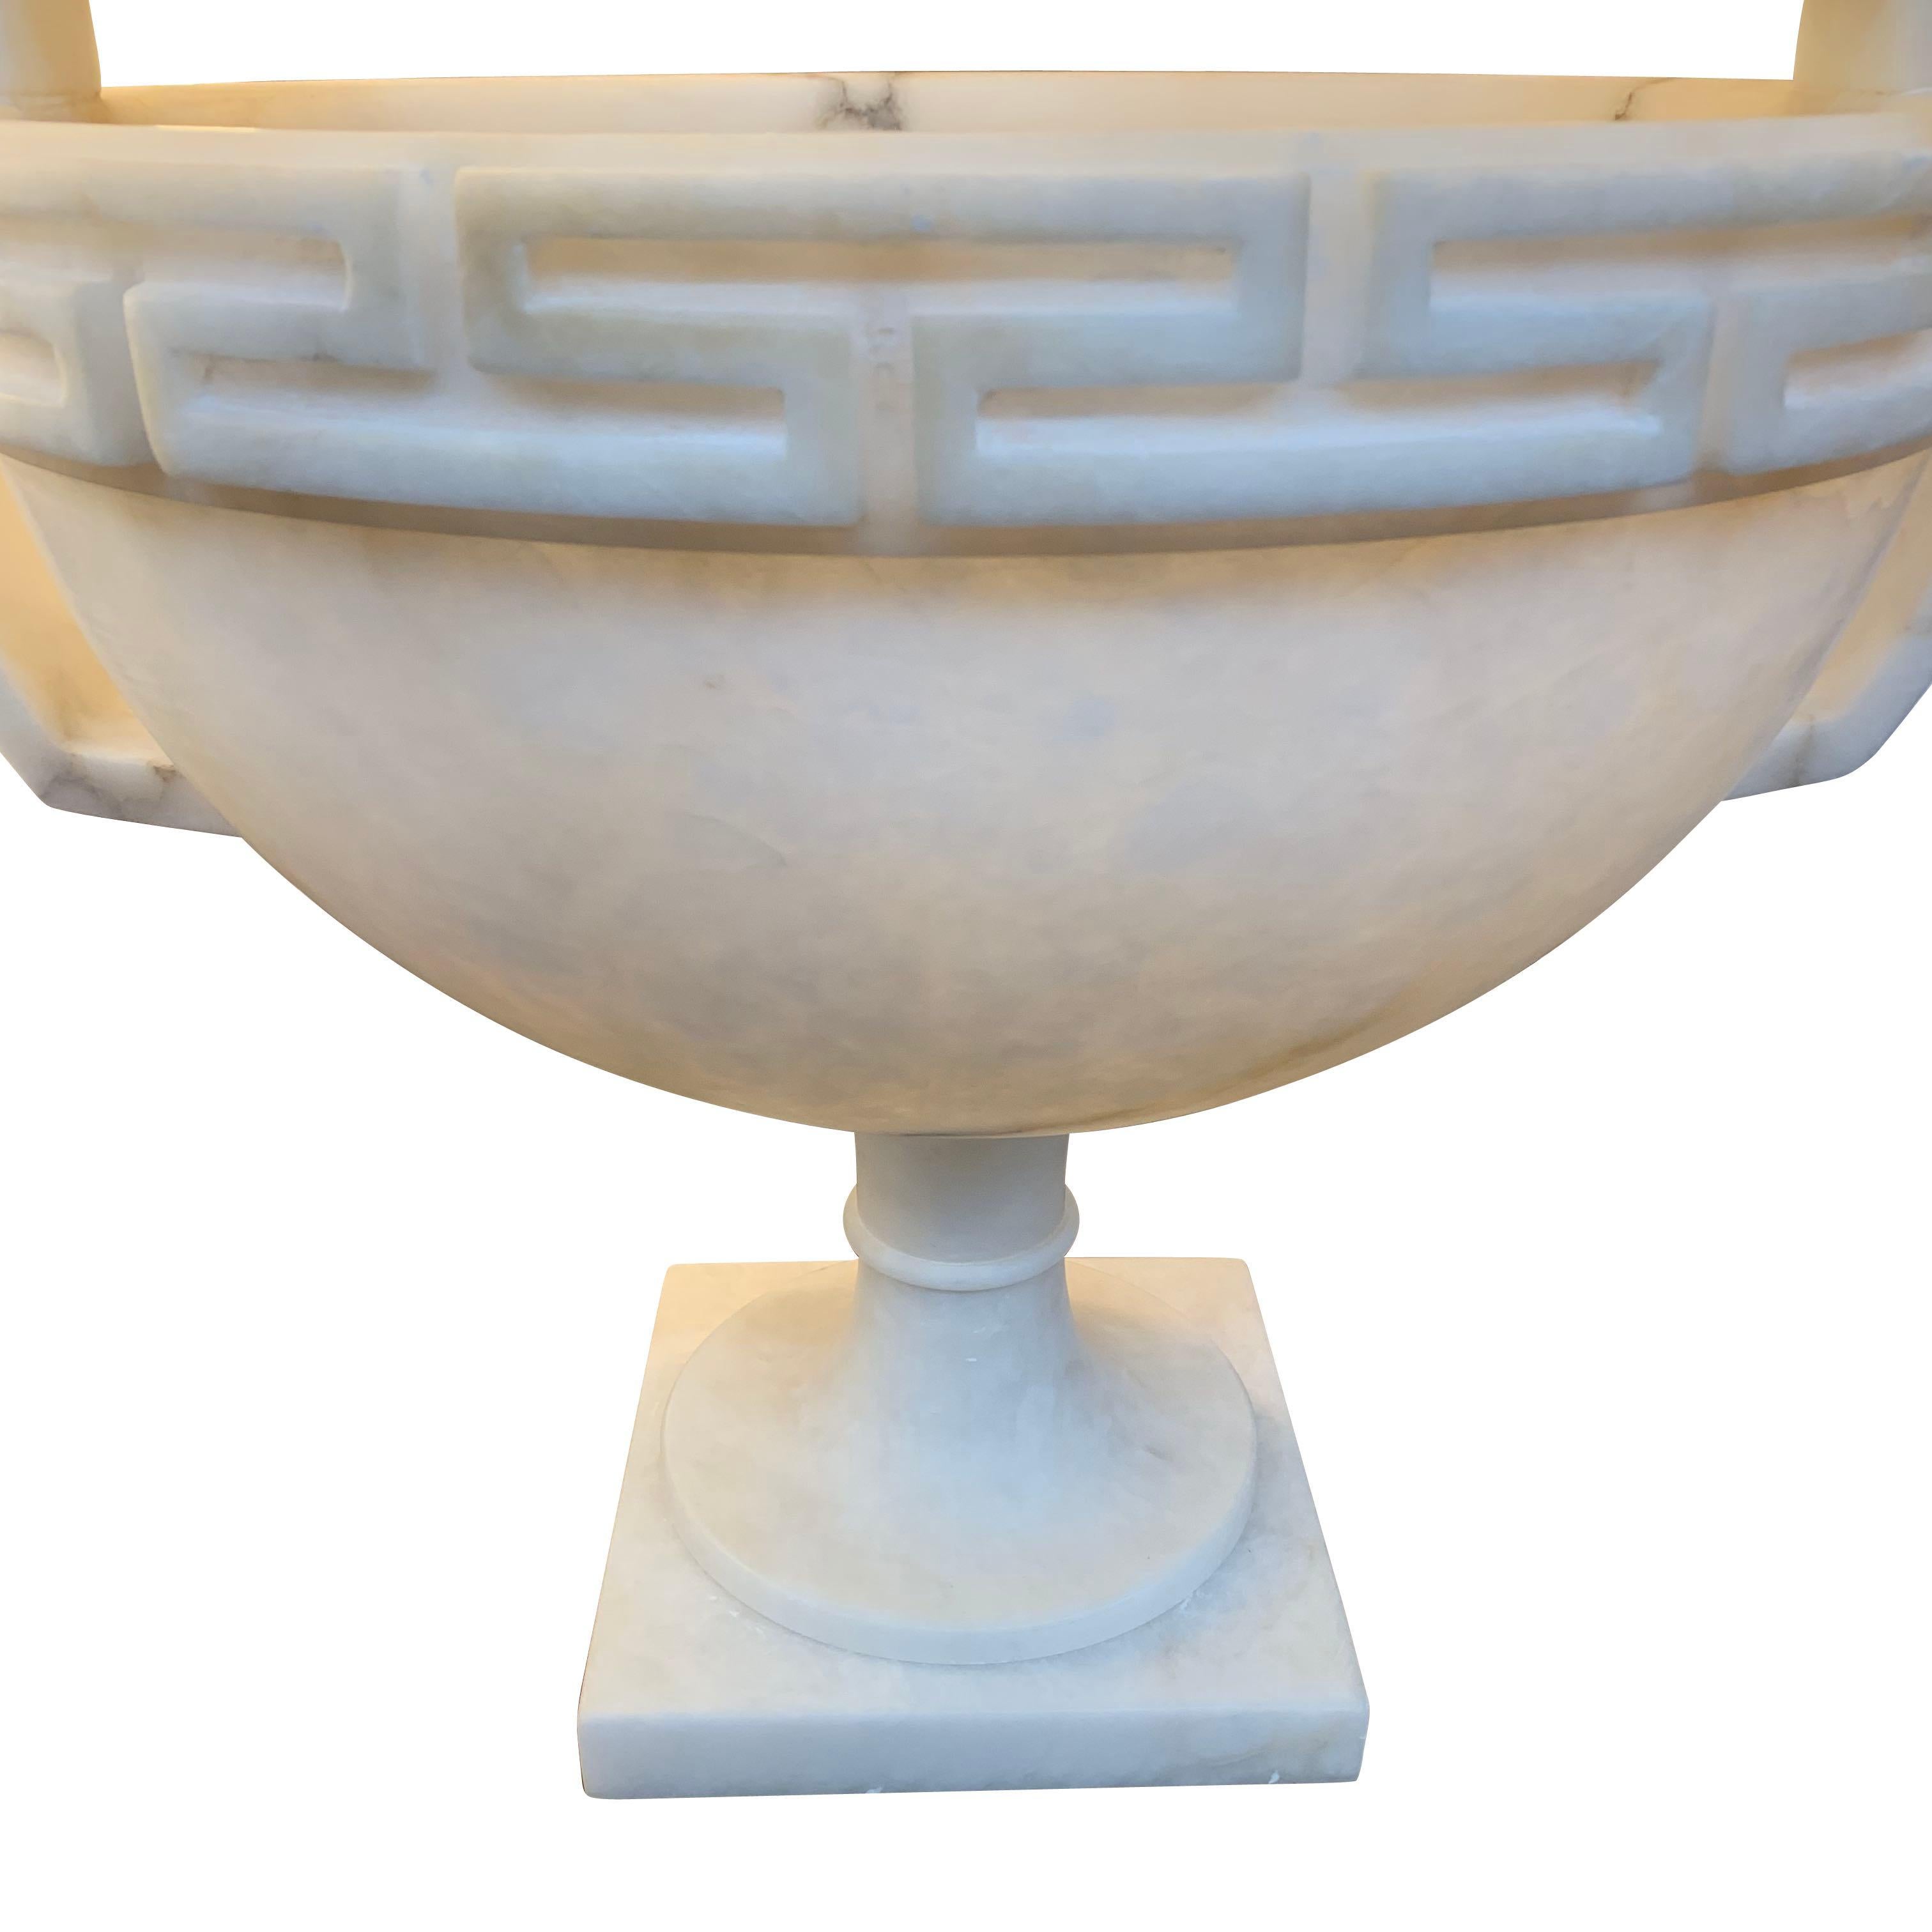 Large footed alabaster bowl with handles and Greek key decorative motif.
Measure: Base 8